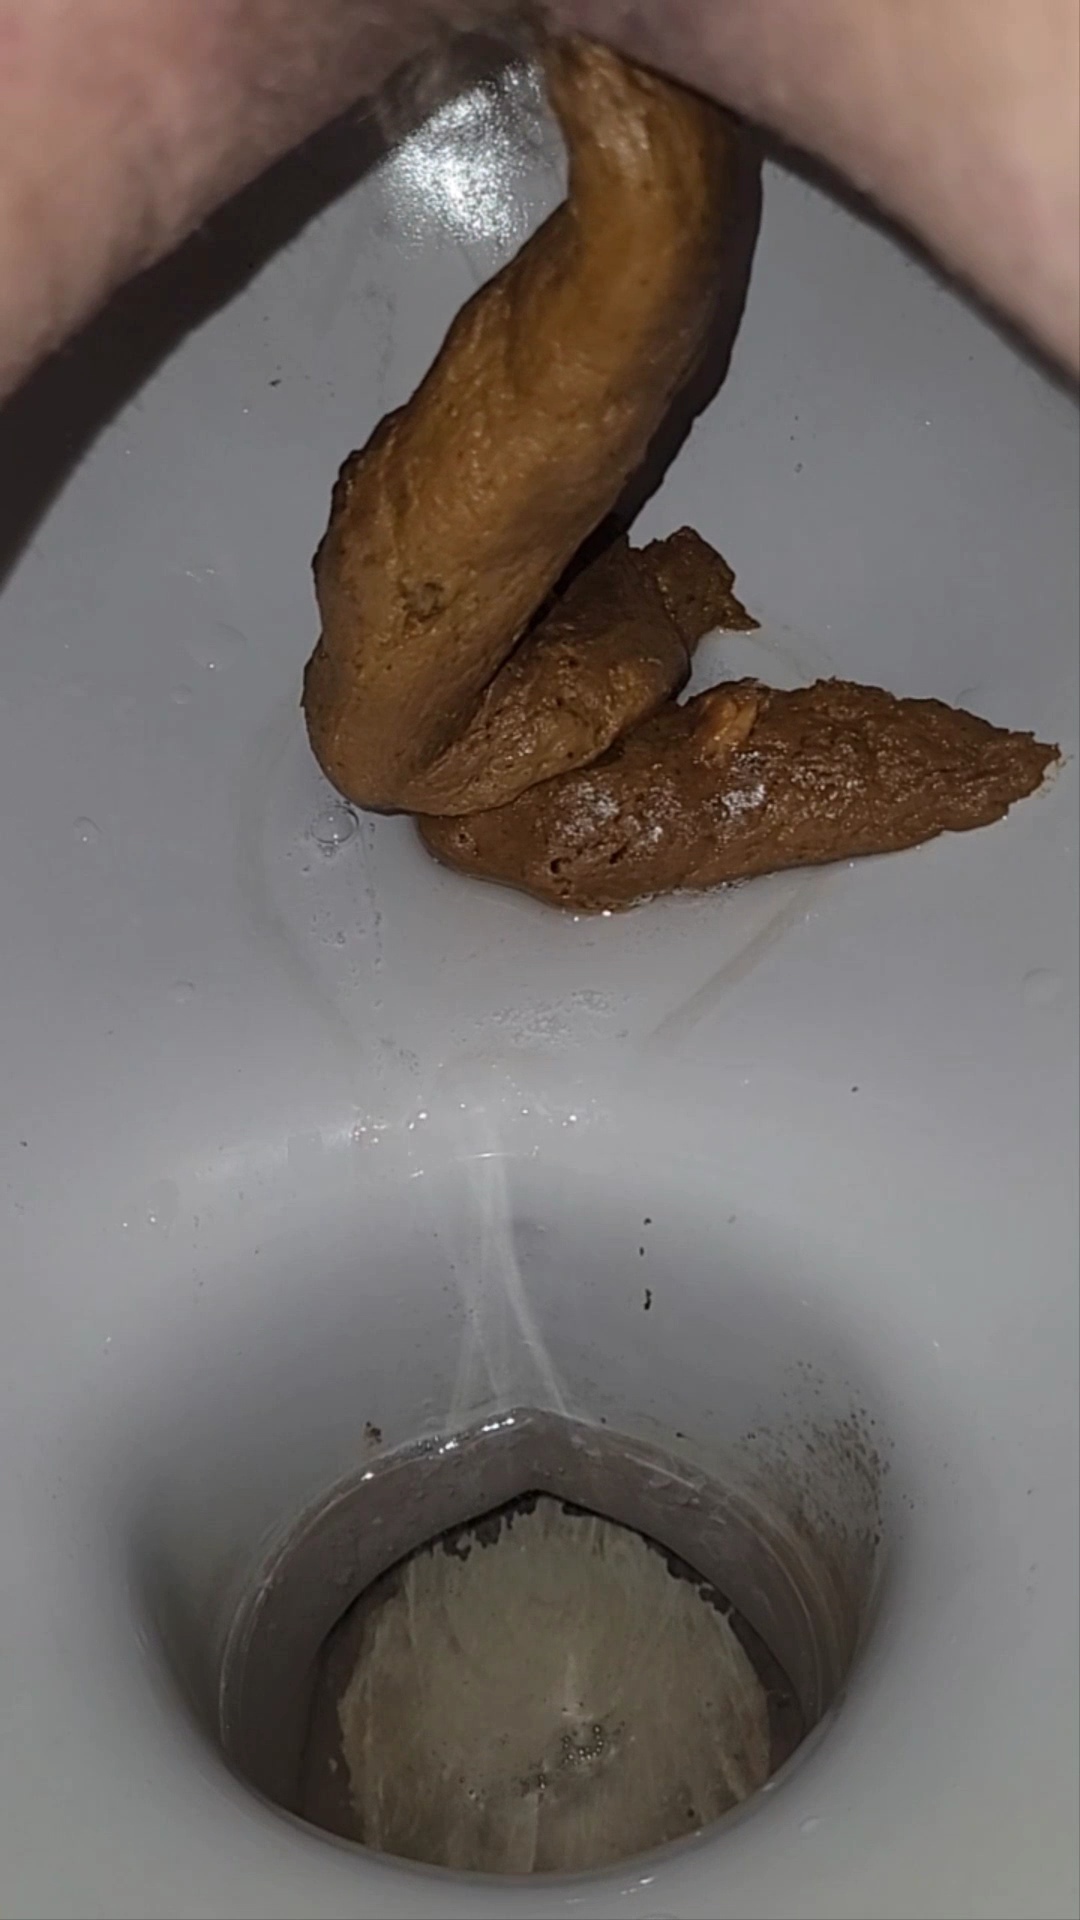 Too much shit for the toilet